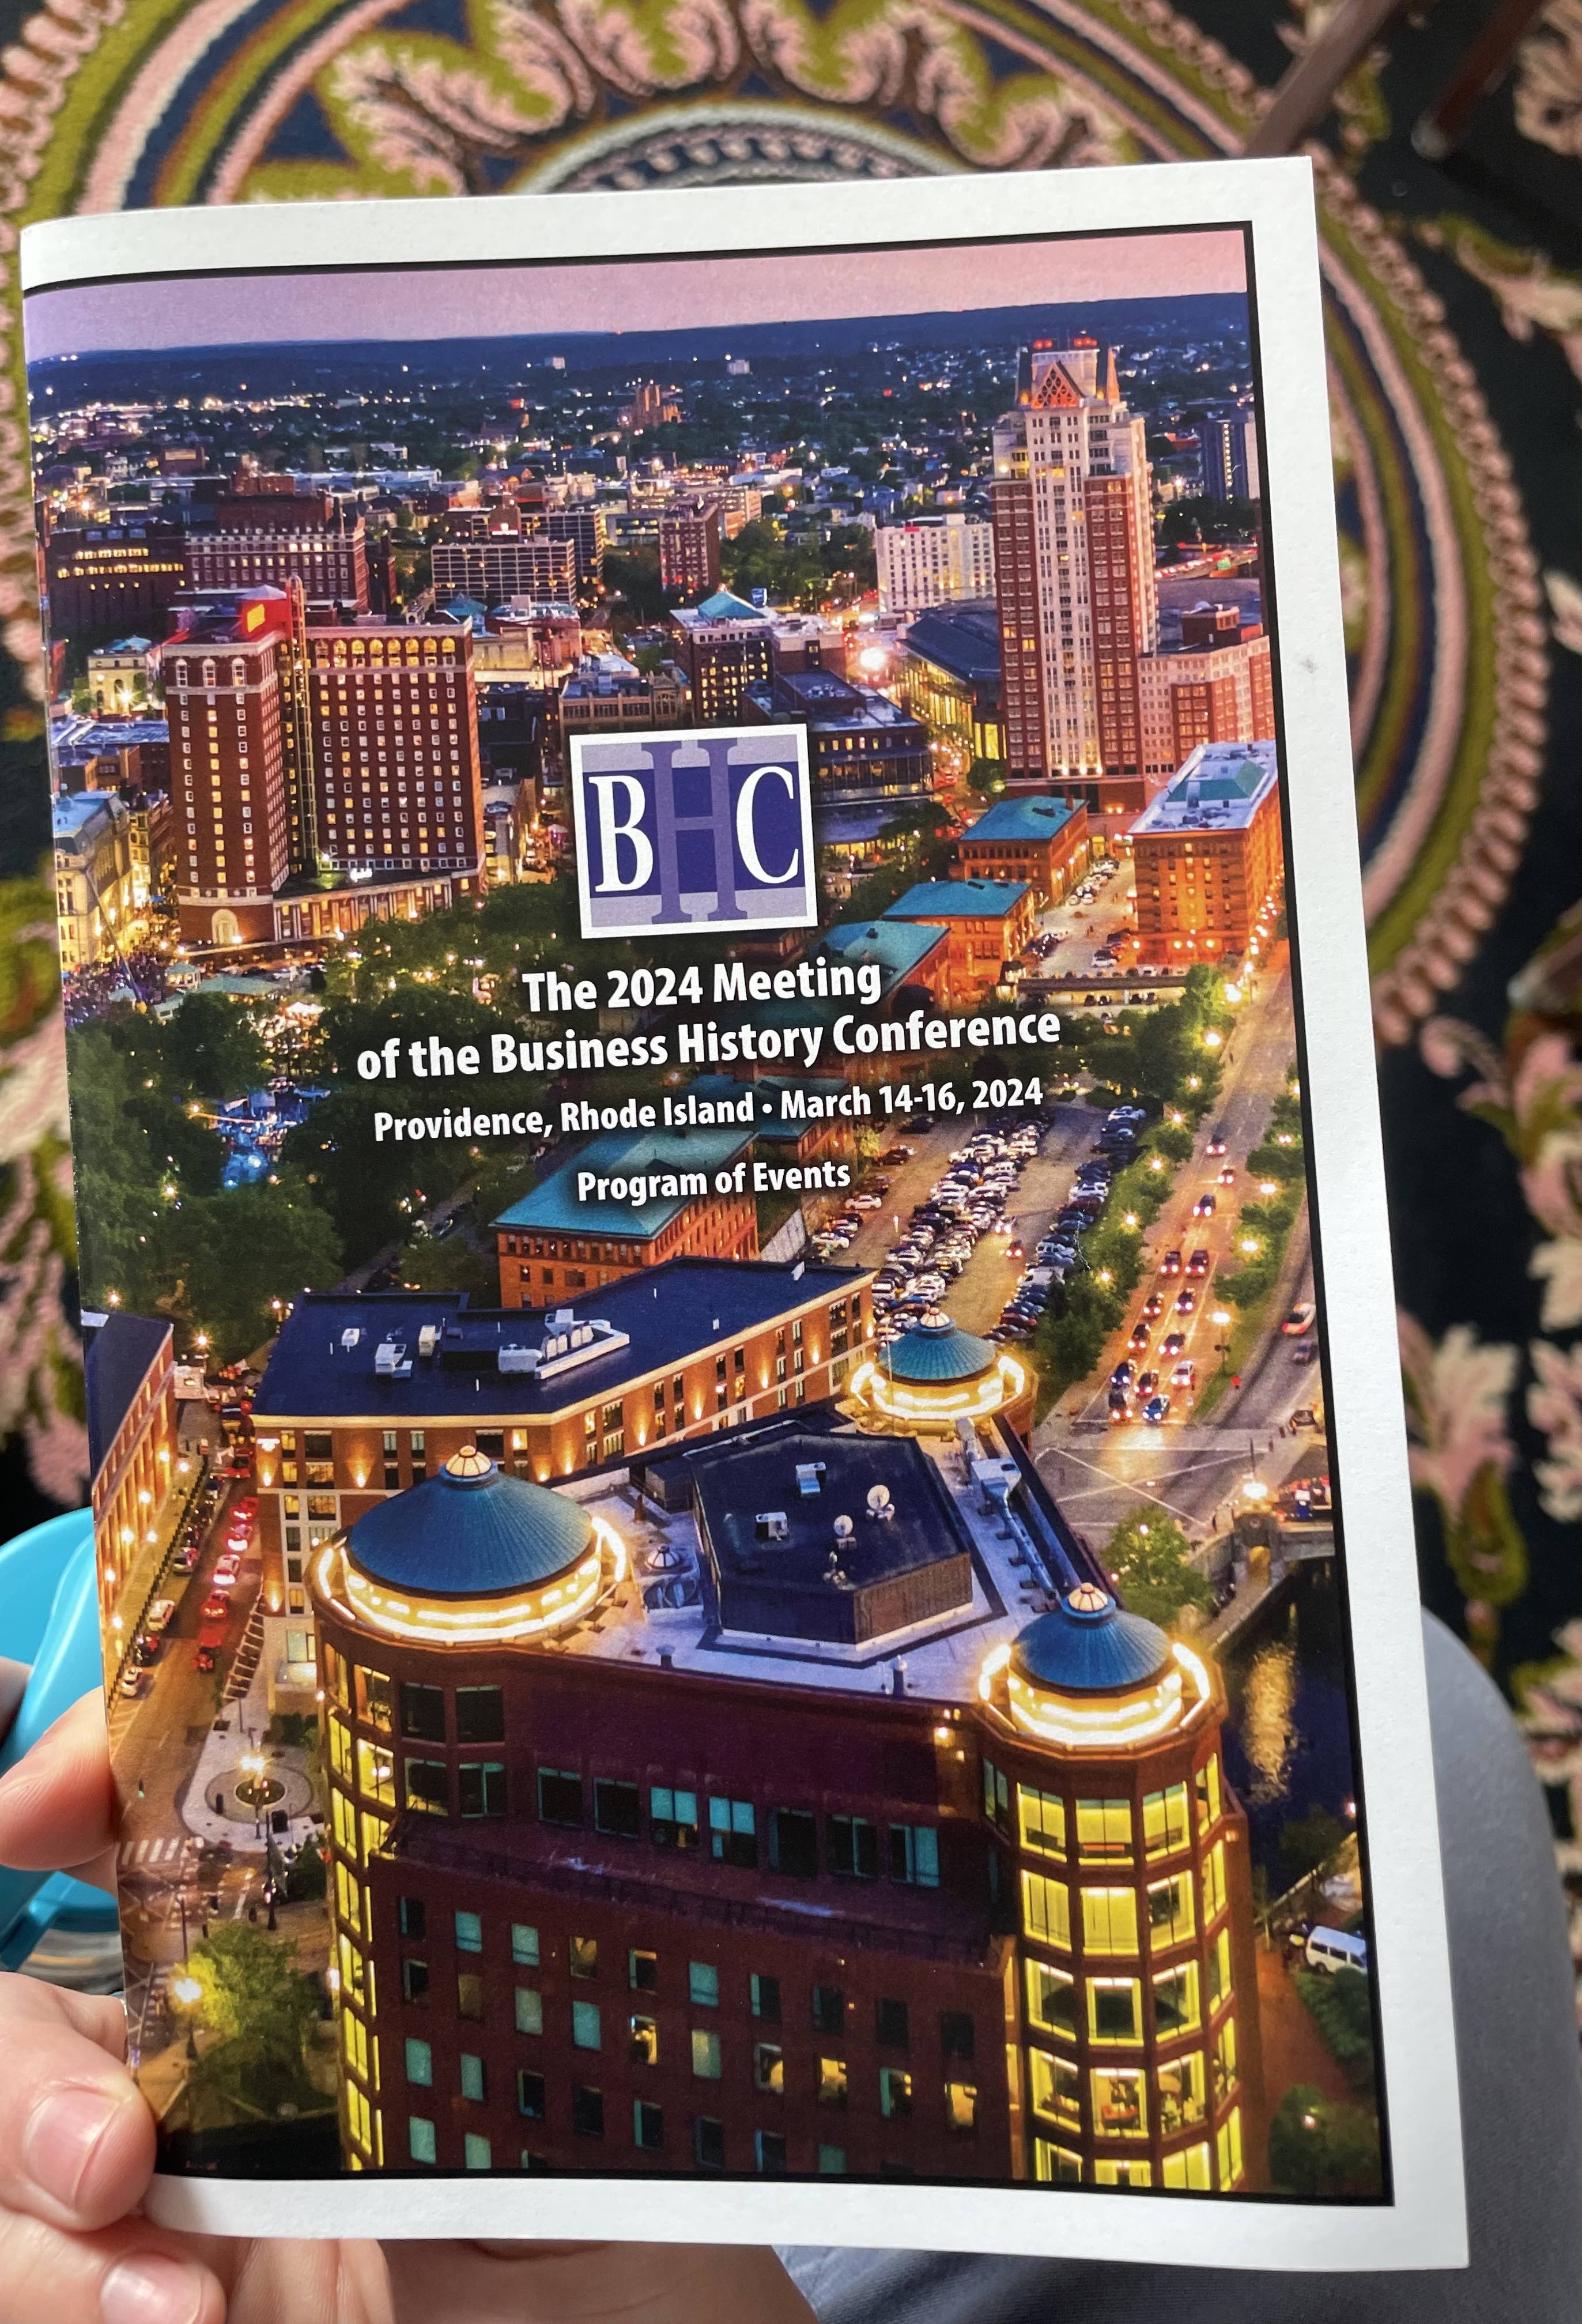 Photo of Kenaston holding the program for the Business History Conference. The program's background is a photograph of downtown Providence.